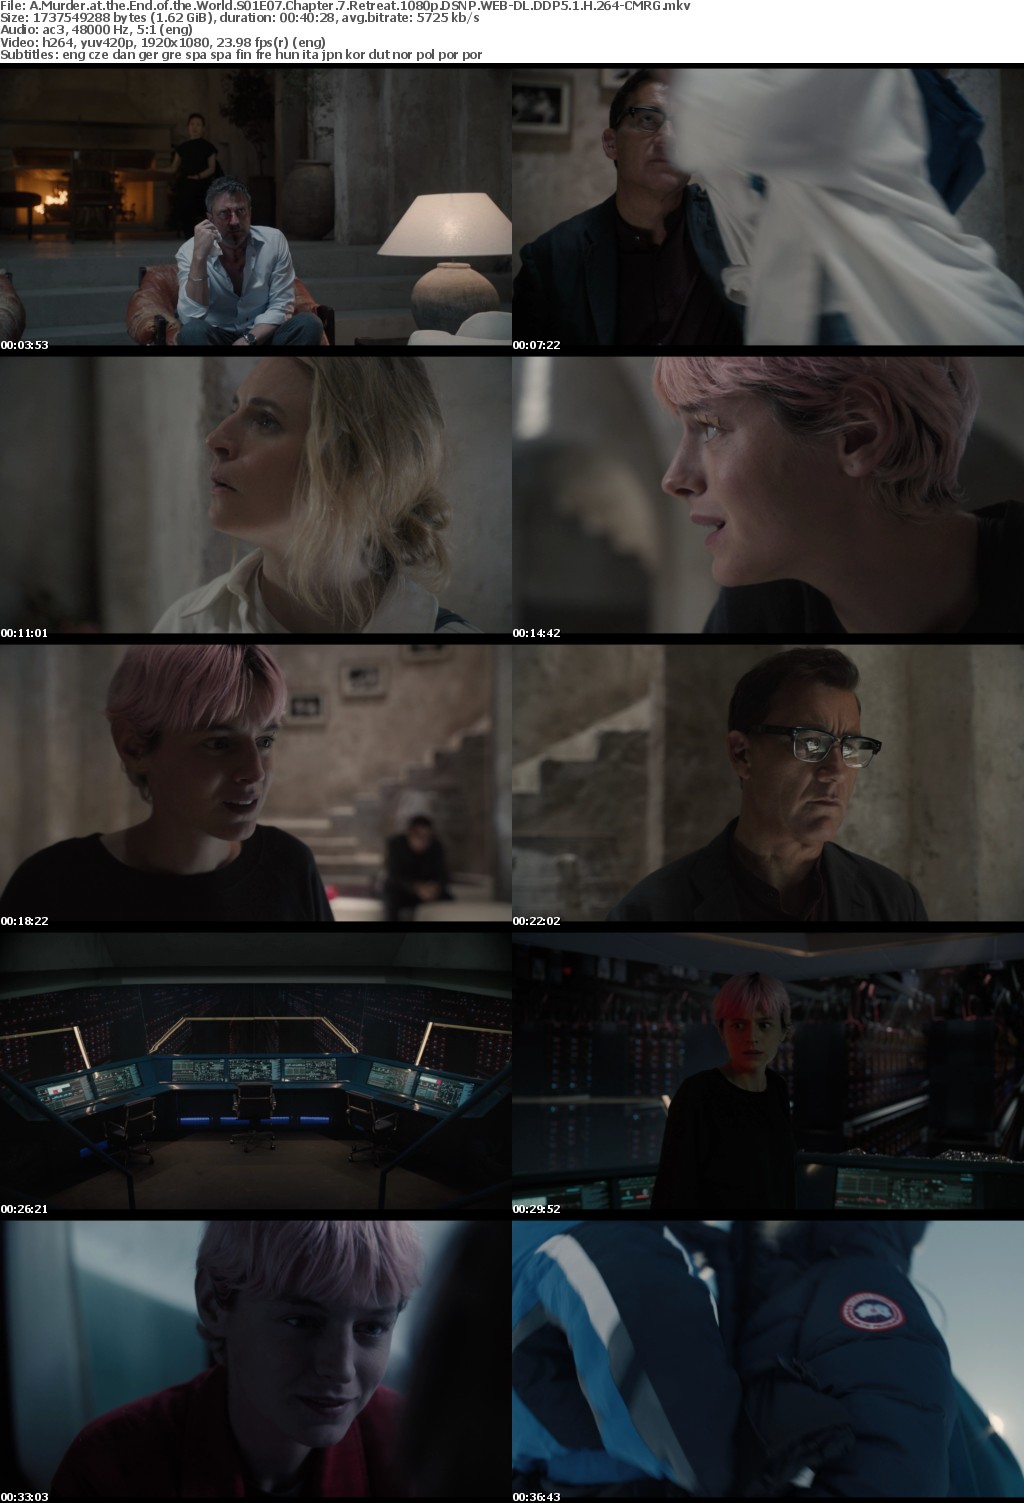 A Murder at the End of the World S01E07 Chapter 7 Retreat 1080p DSNP WEB-DL DDP5 1 H 264-CMRG